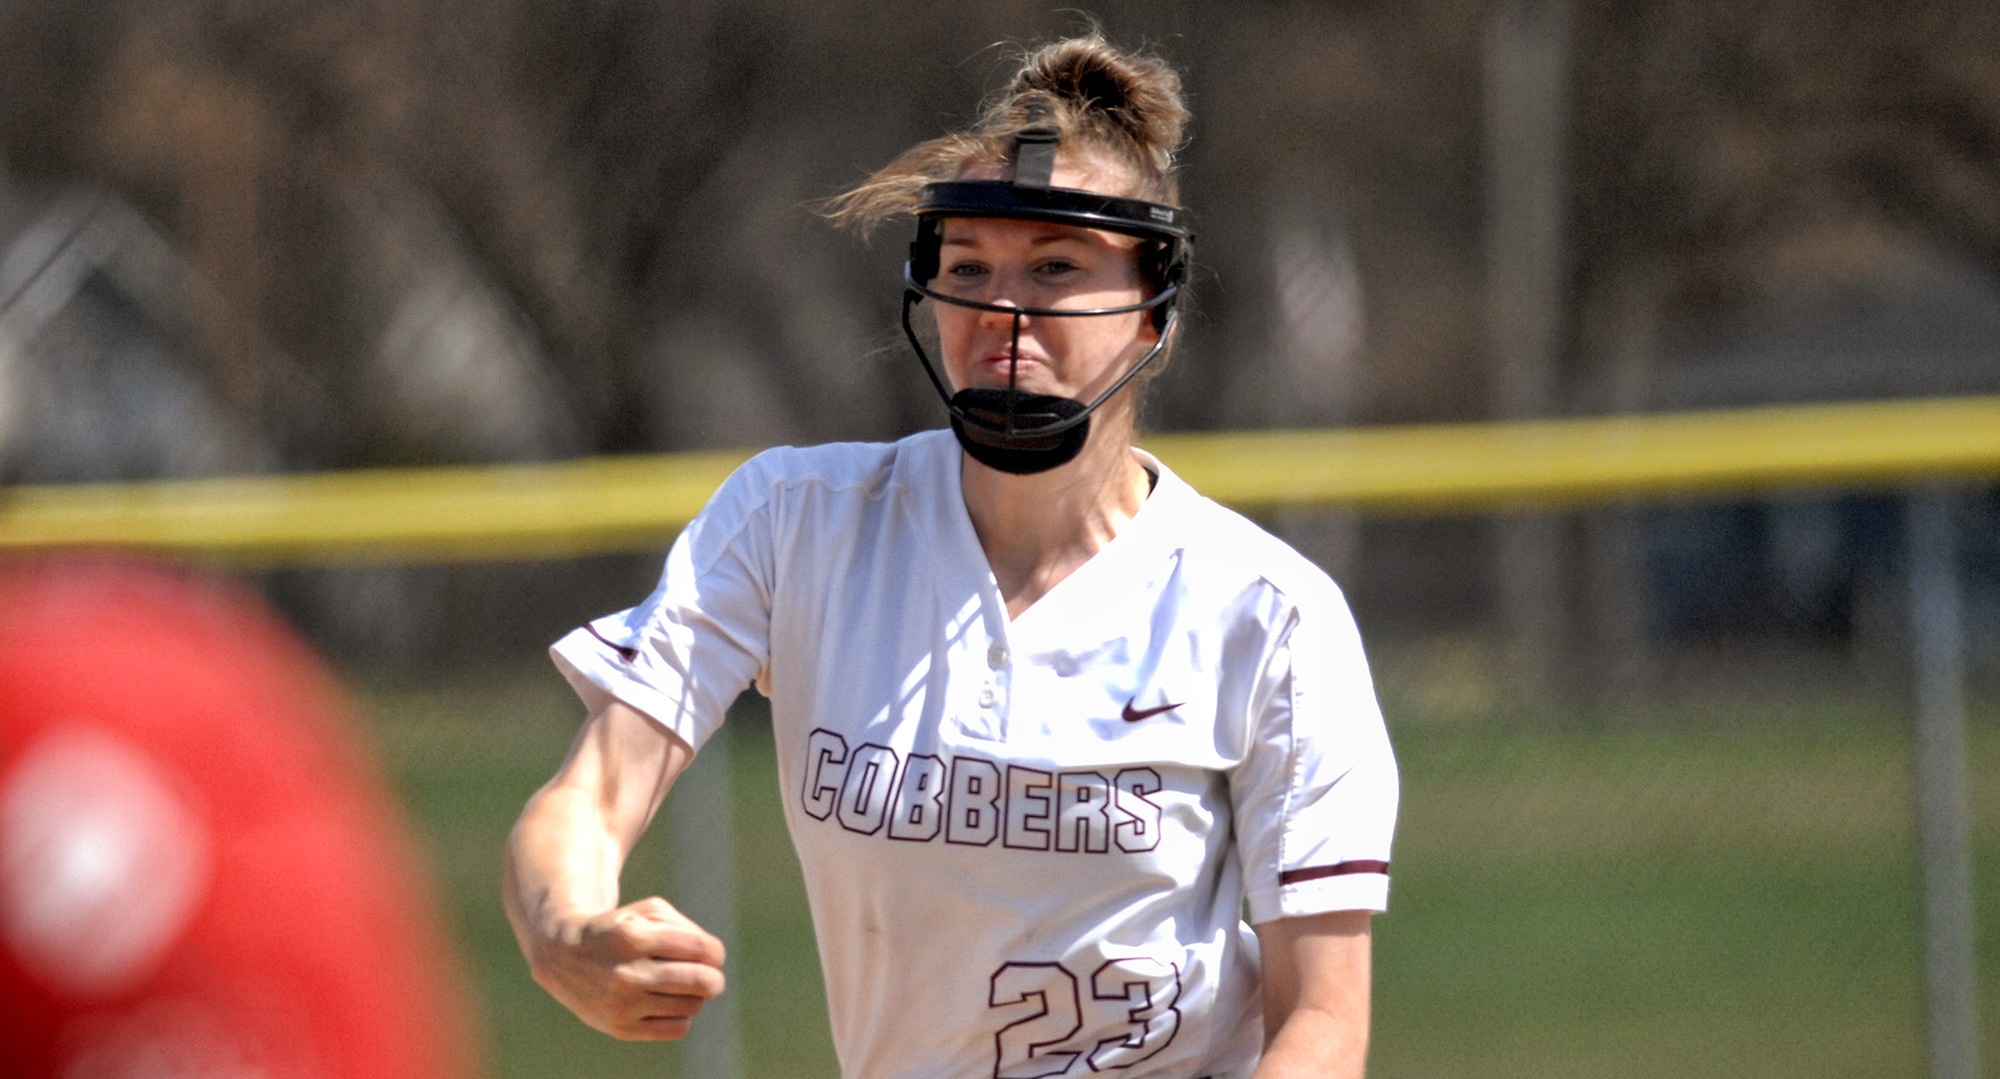 Junior Megan Gavin struck out 11 and only allowed a bloop single in the Cobbers' 4-0 win over Mitchell on Tuesday.